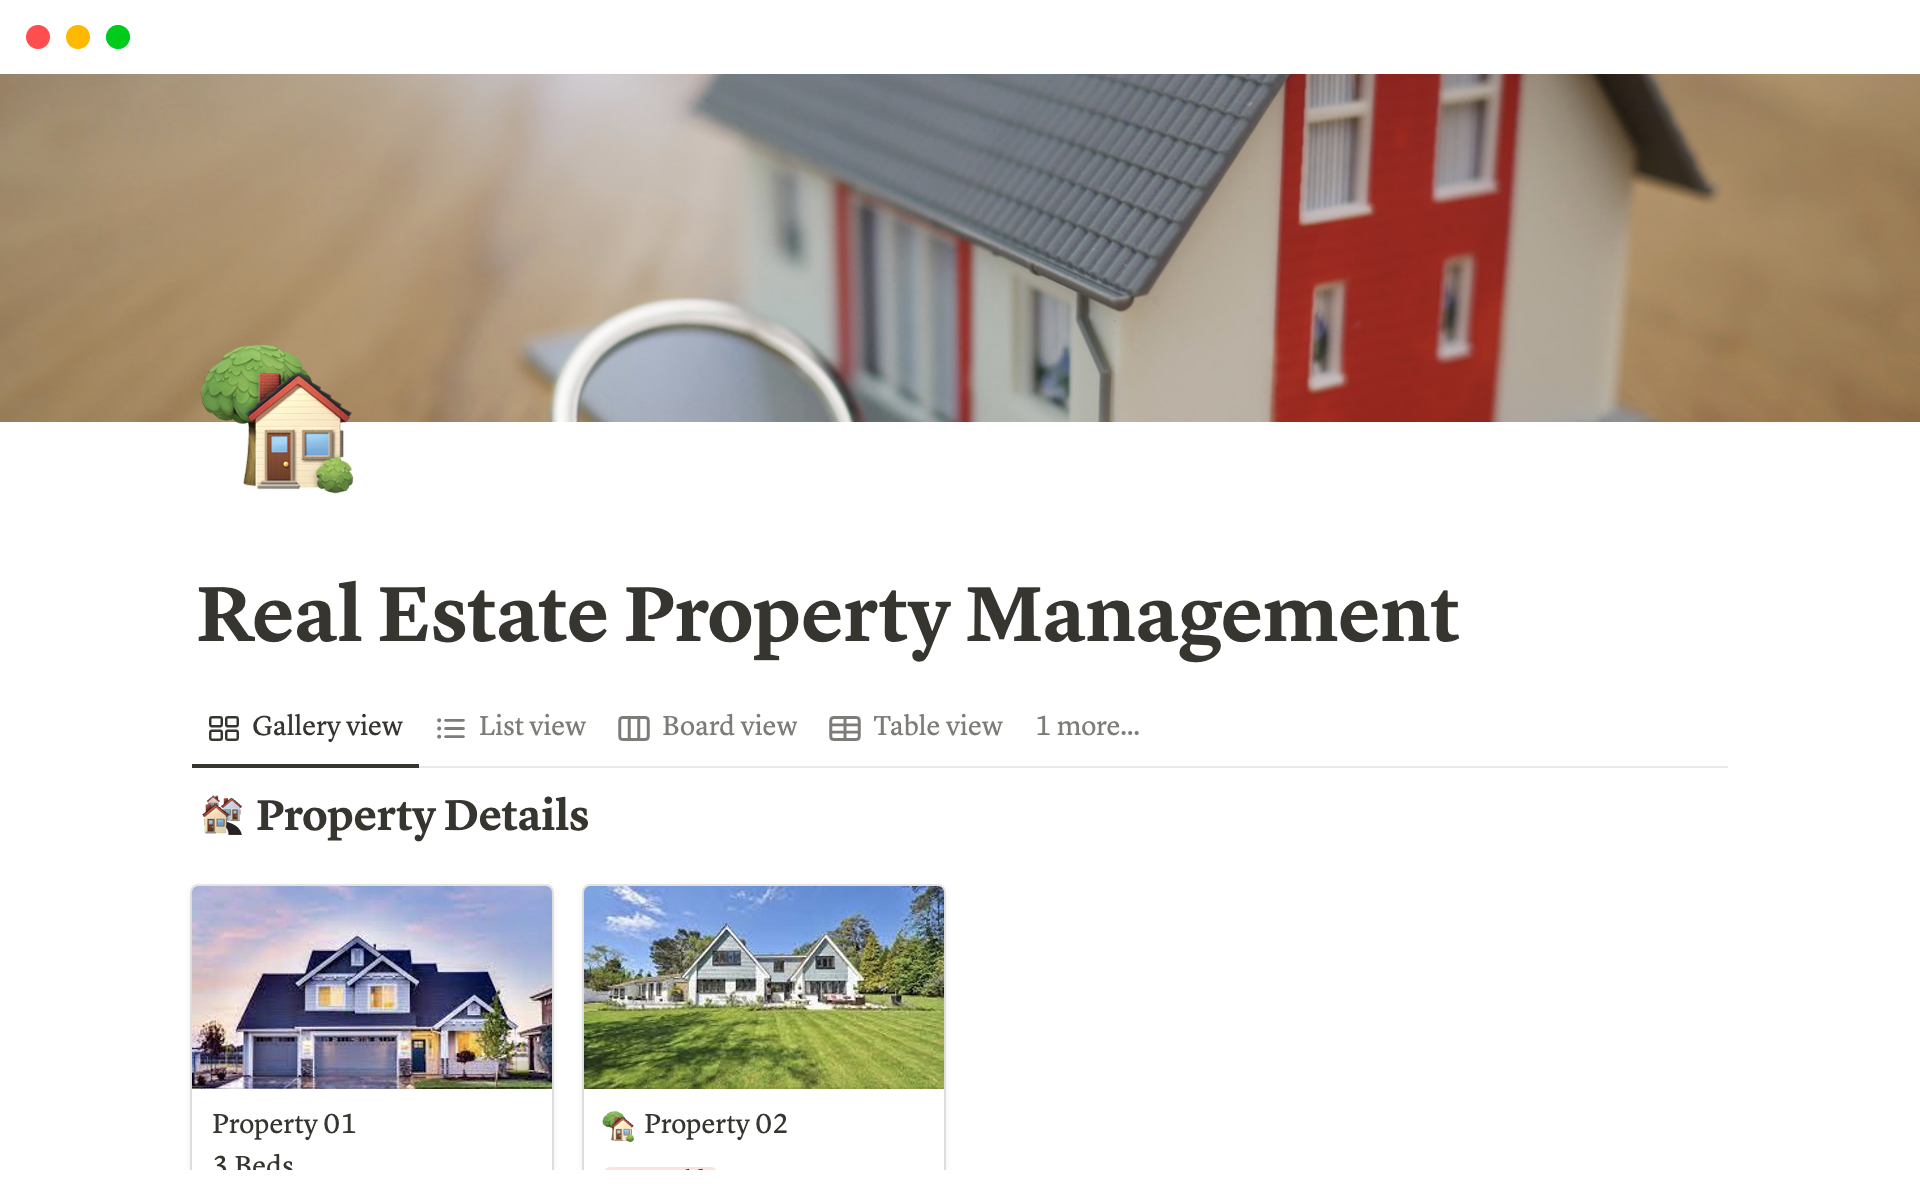 Enables real estate agents to efficiently manage their properties with an organized system.